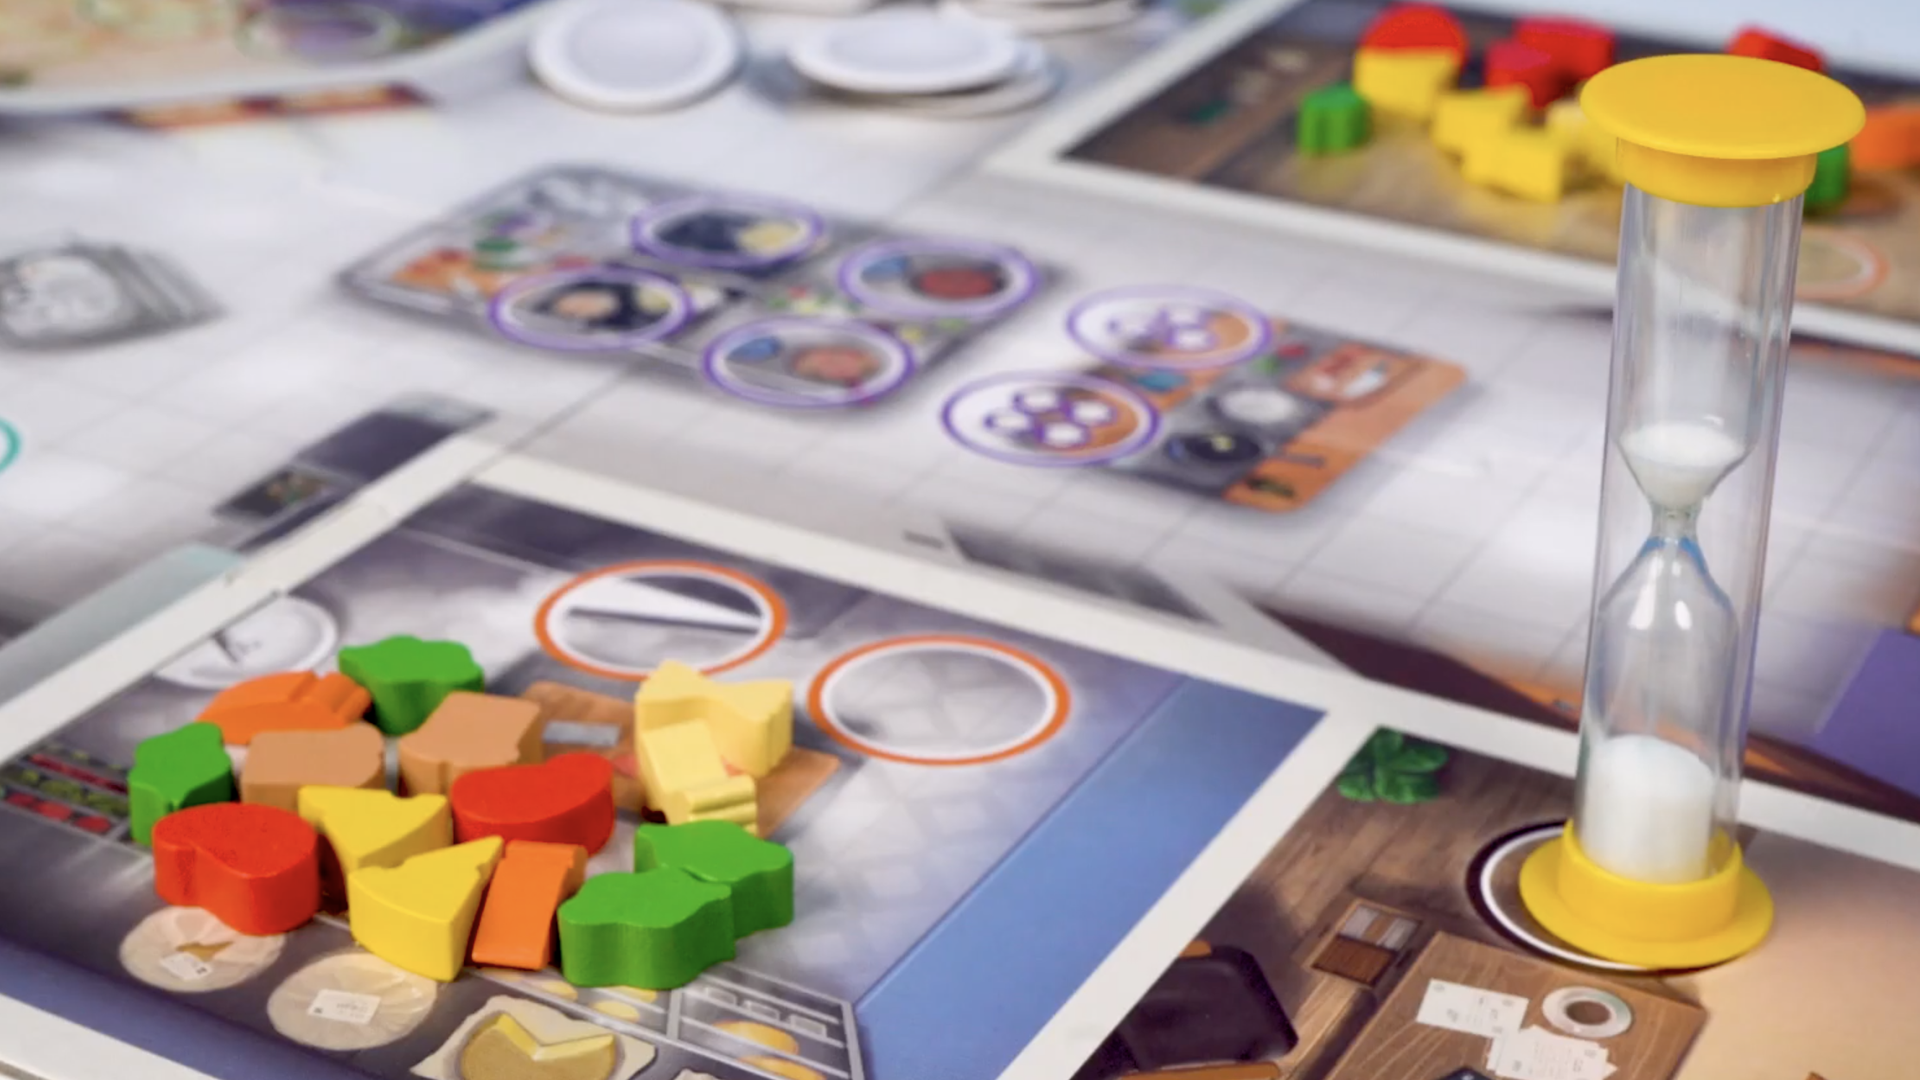 Image for Kitchen Rush is basically Overcooked: The Board Game, serving up its Revised Edition in the US “soon”